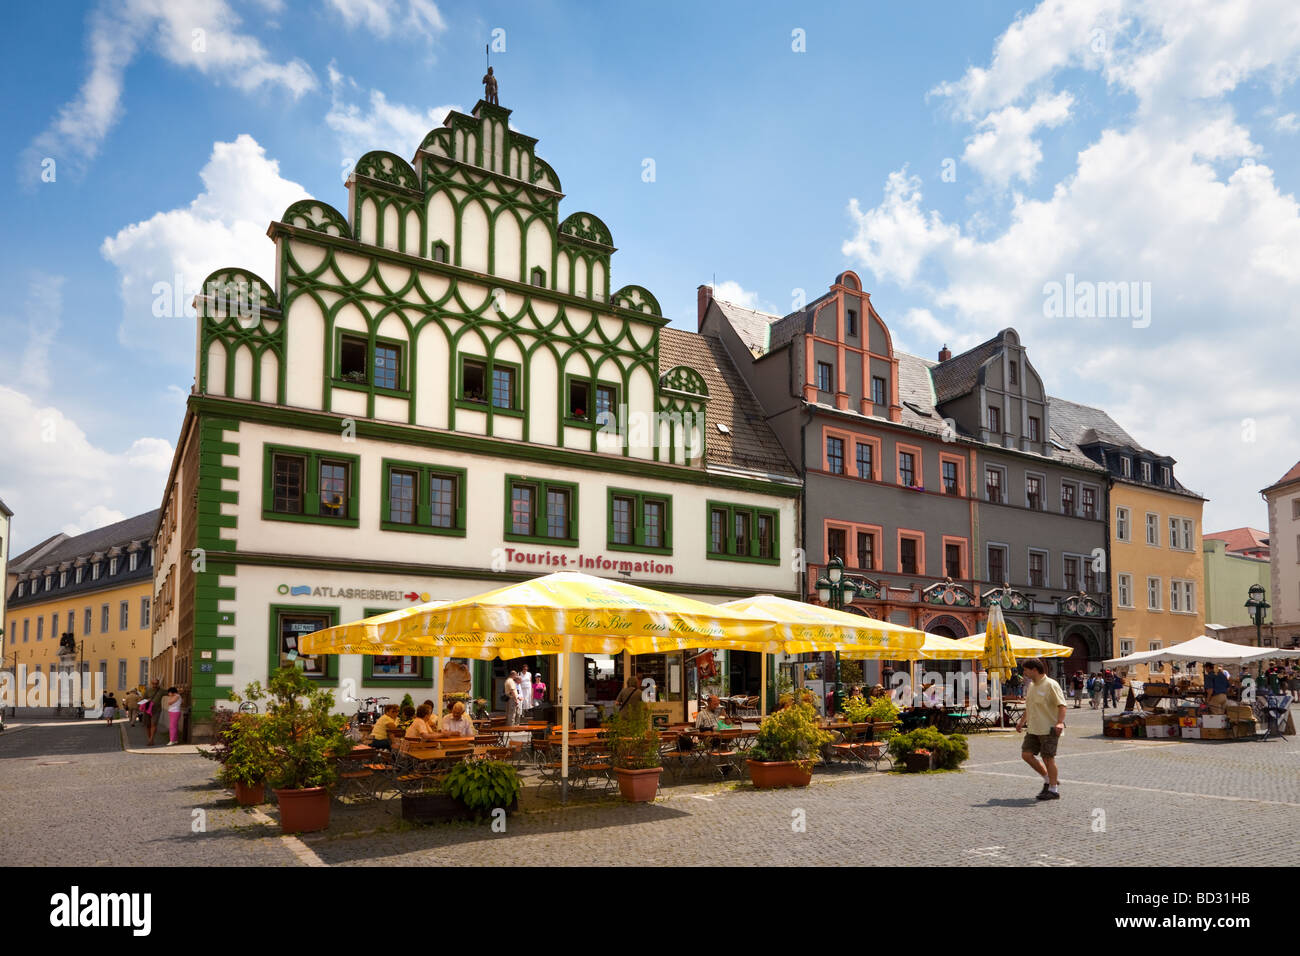 Market Place, Weimar, Germany, Europe - tourist information office and  Lucas Cranach House with pavement cafe in front Stock Photo